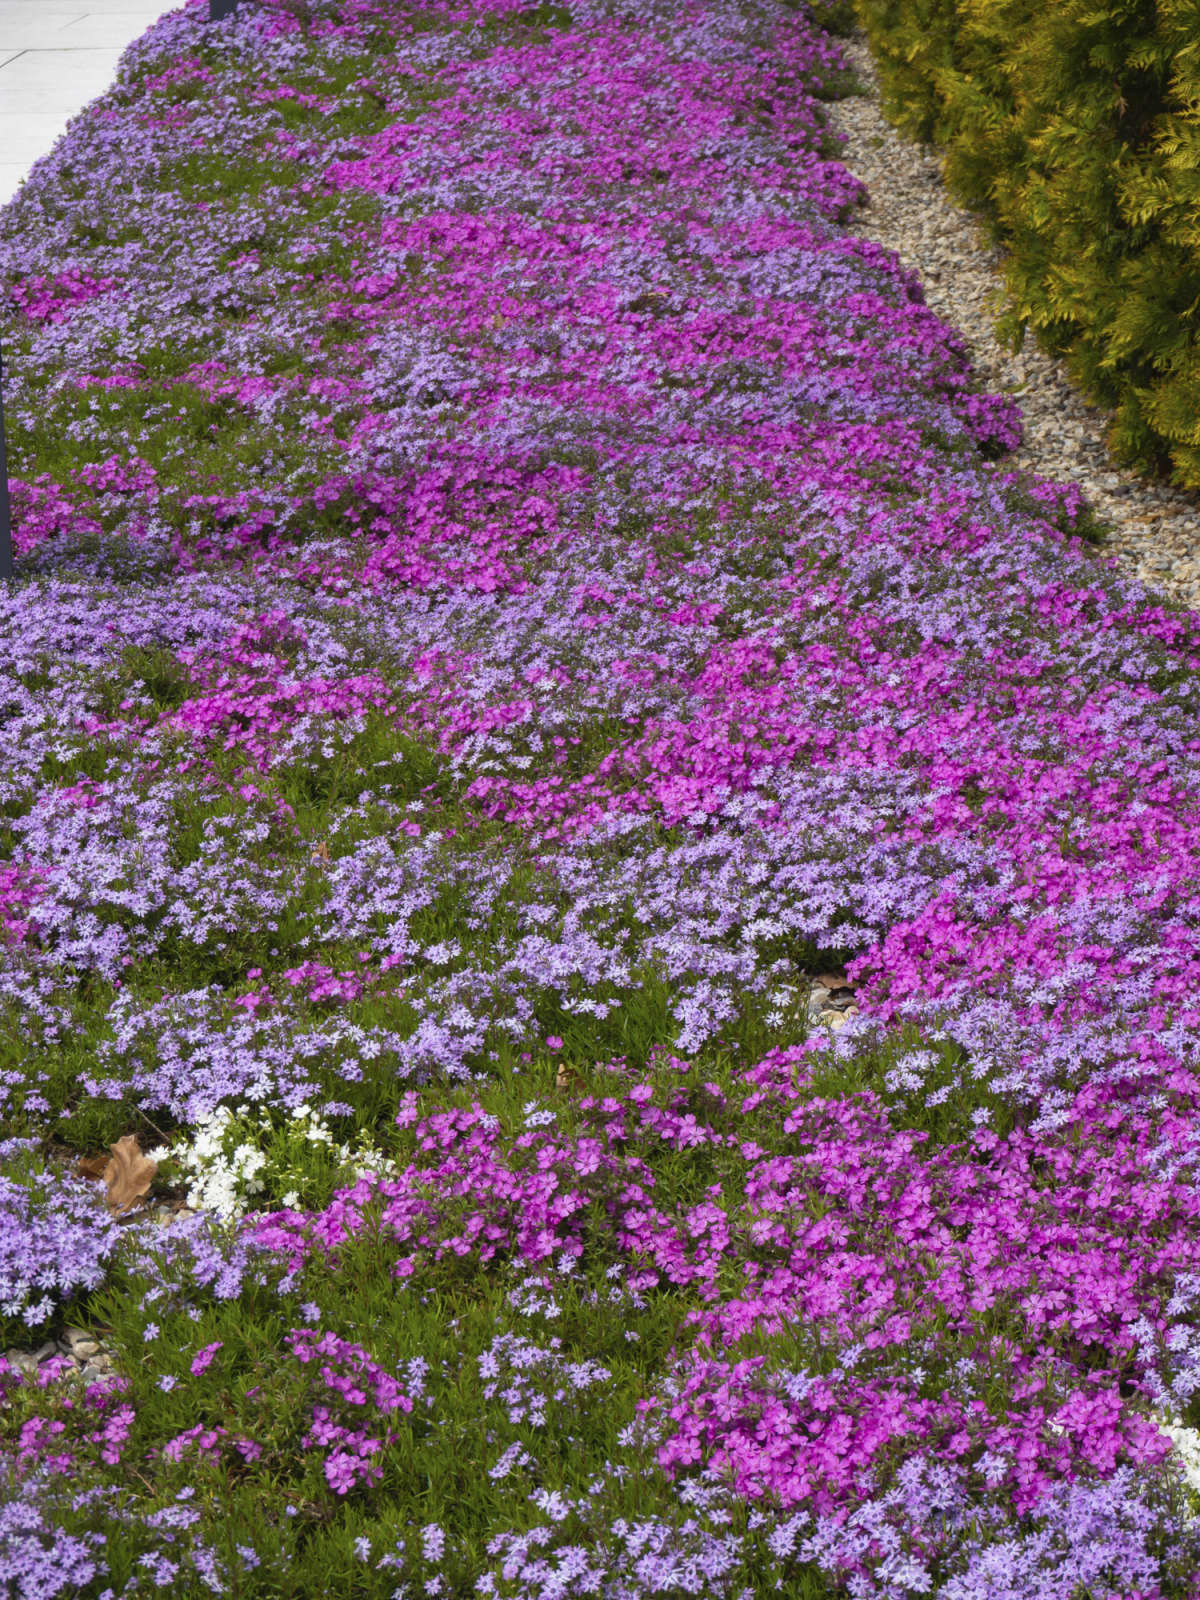 A path of multicolored creeping phlox flowers